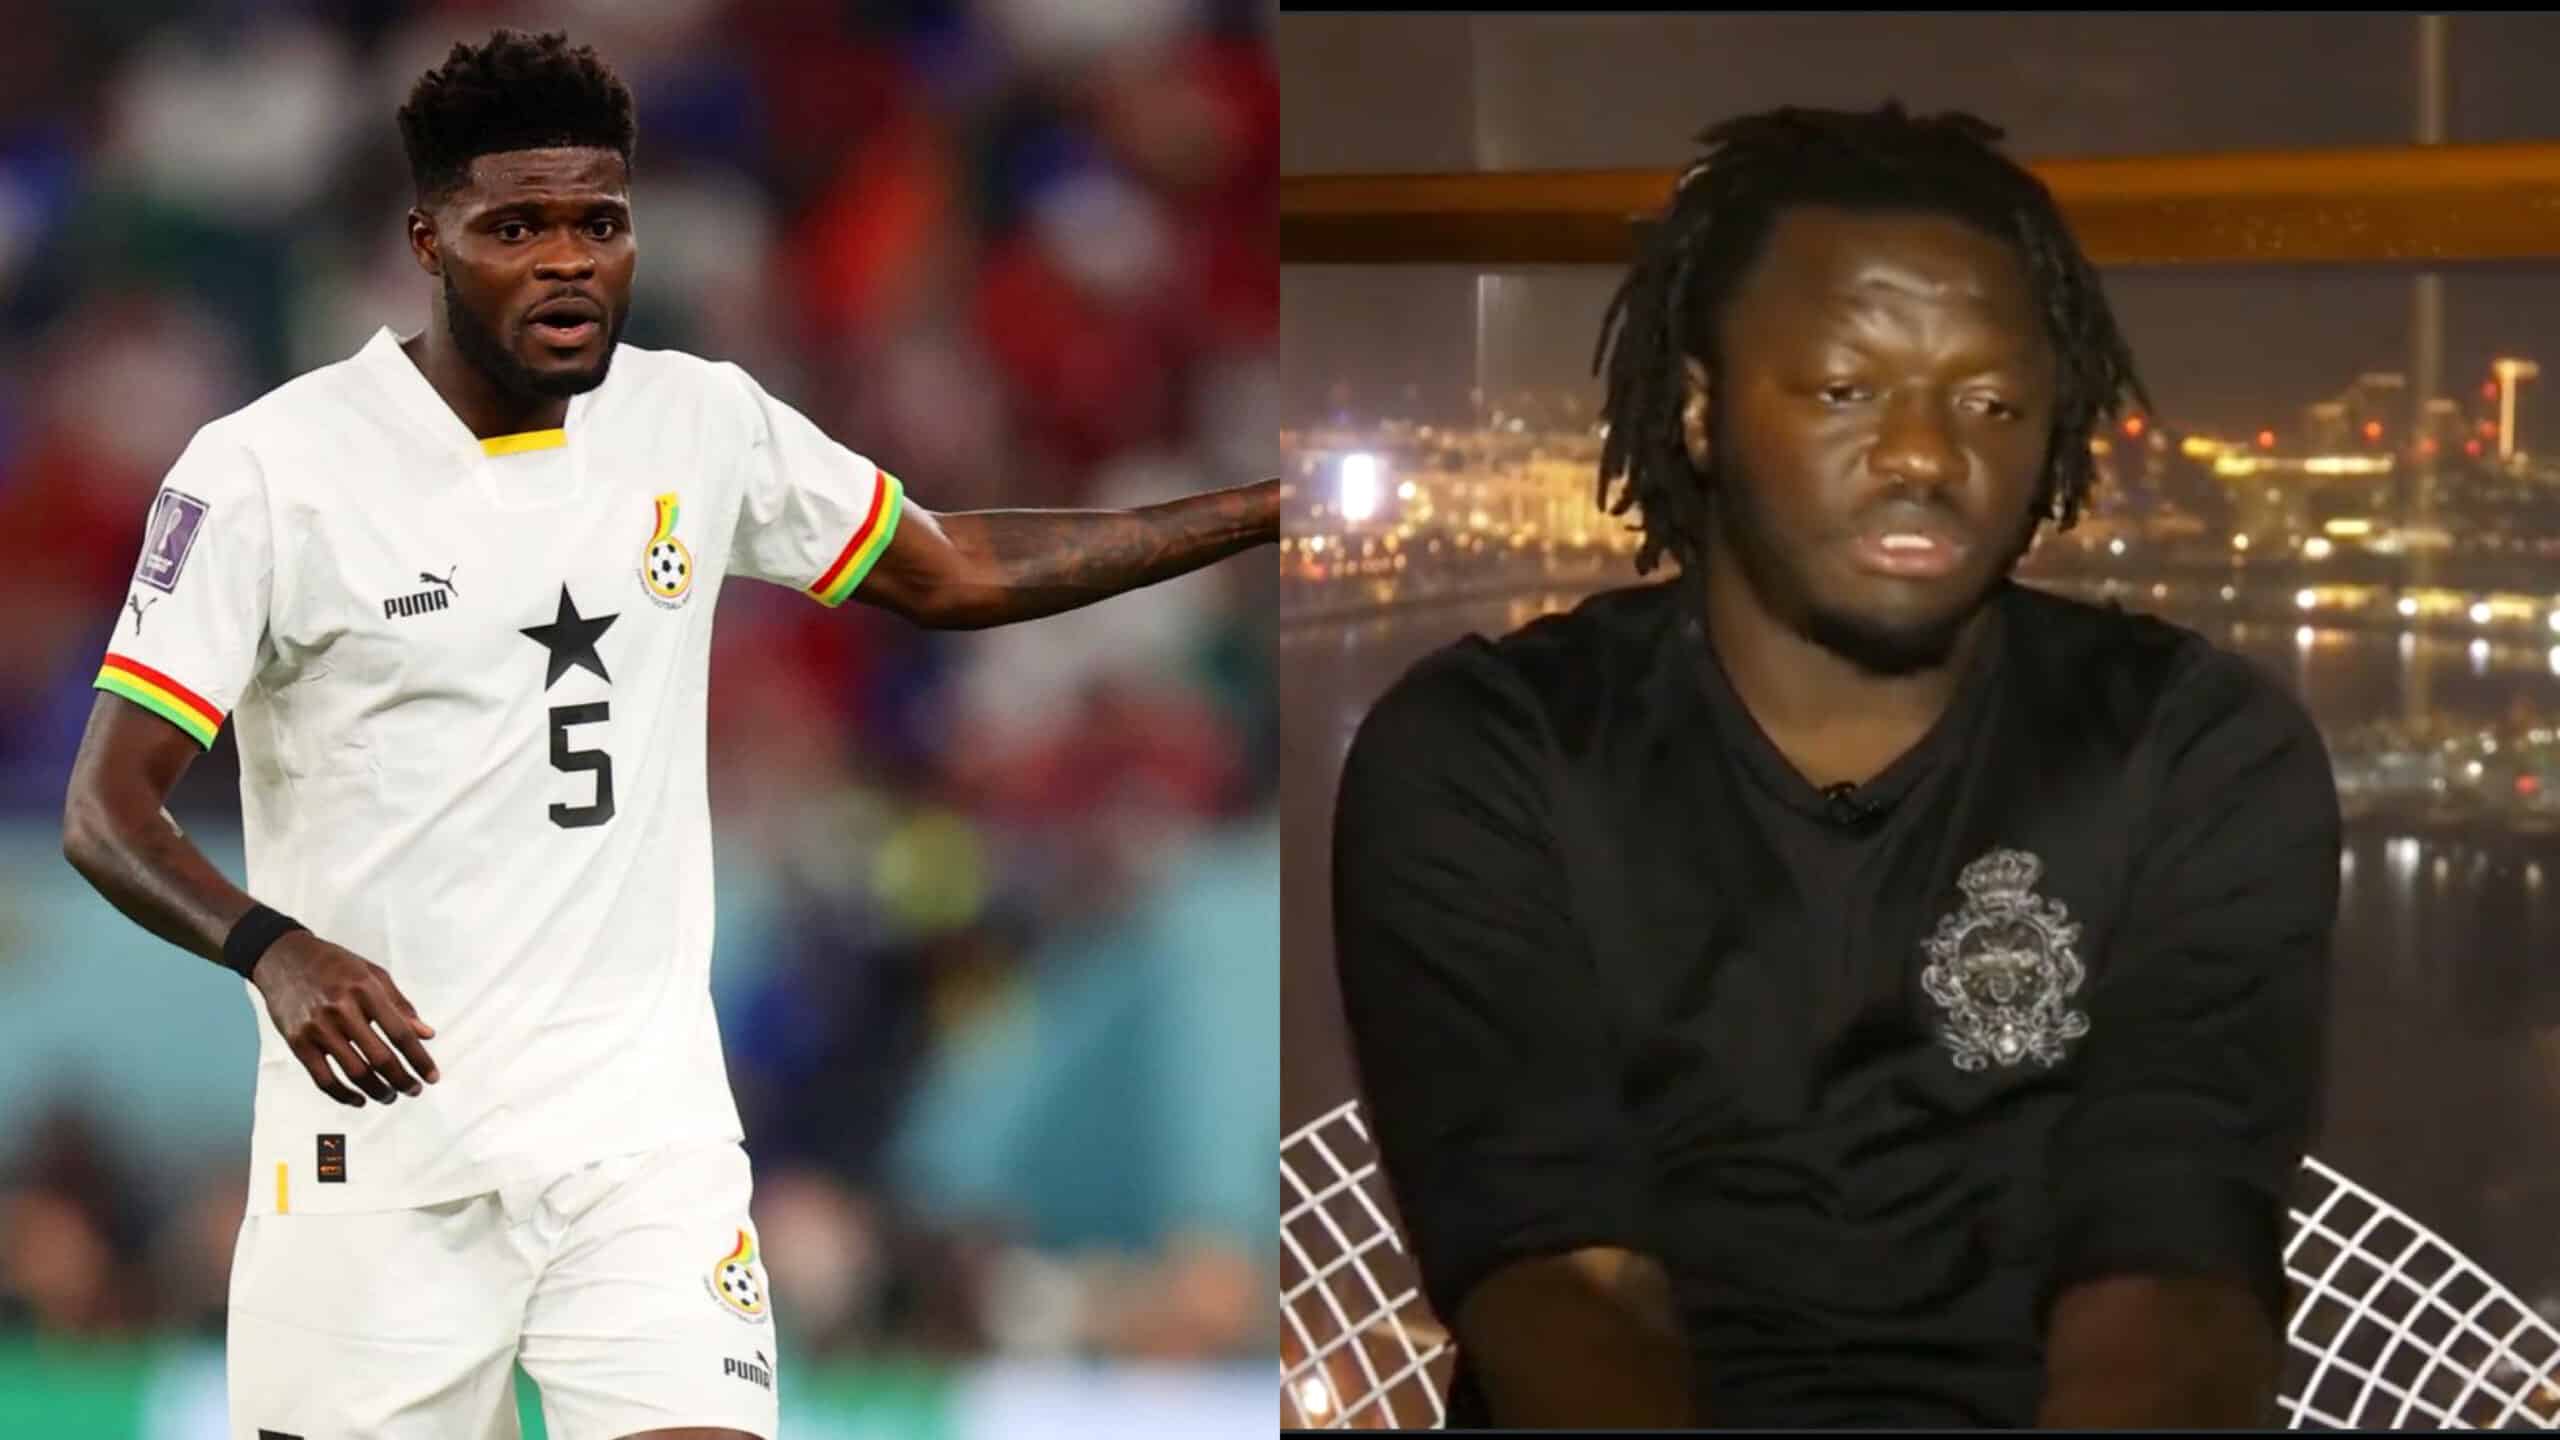 "Black Stars is not doing well because Partey does not give his all" - Sulley